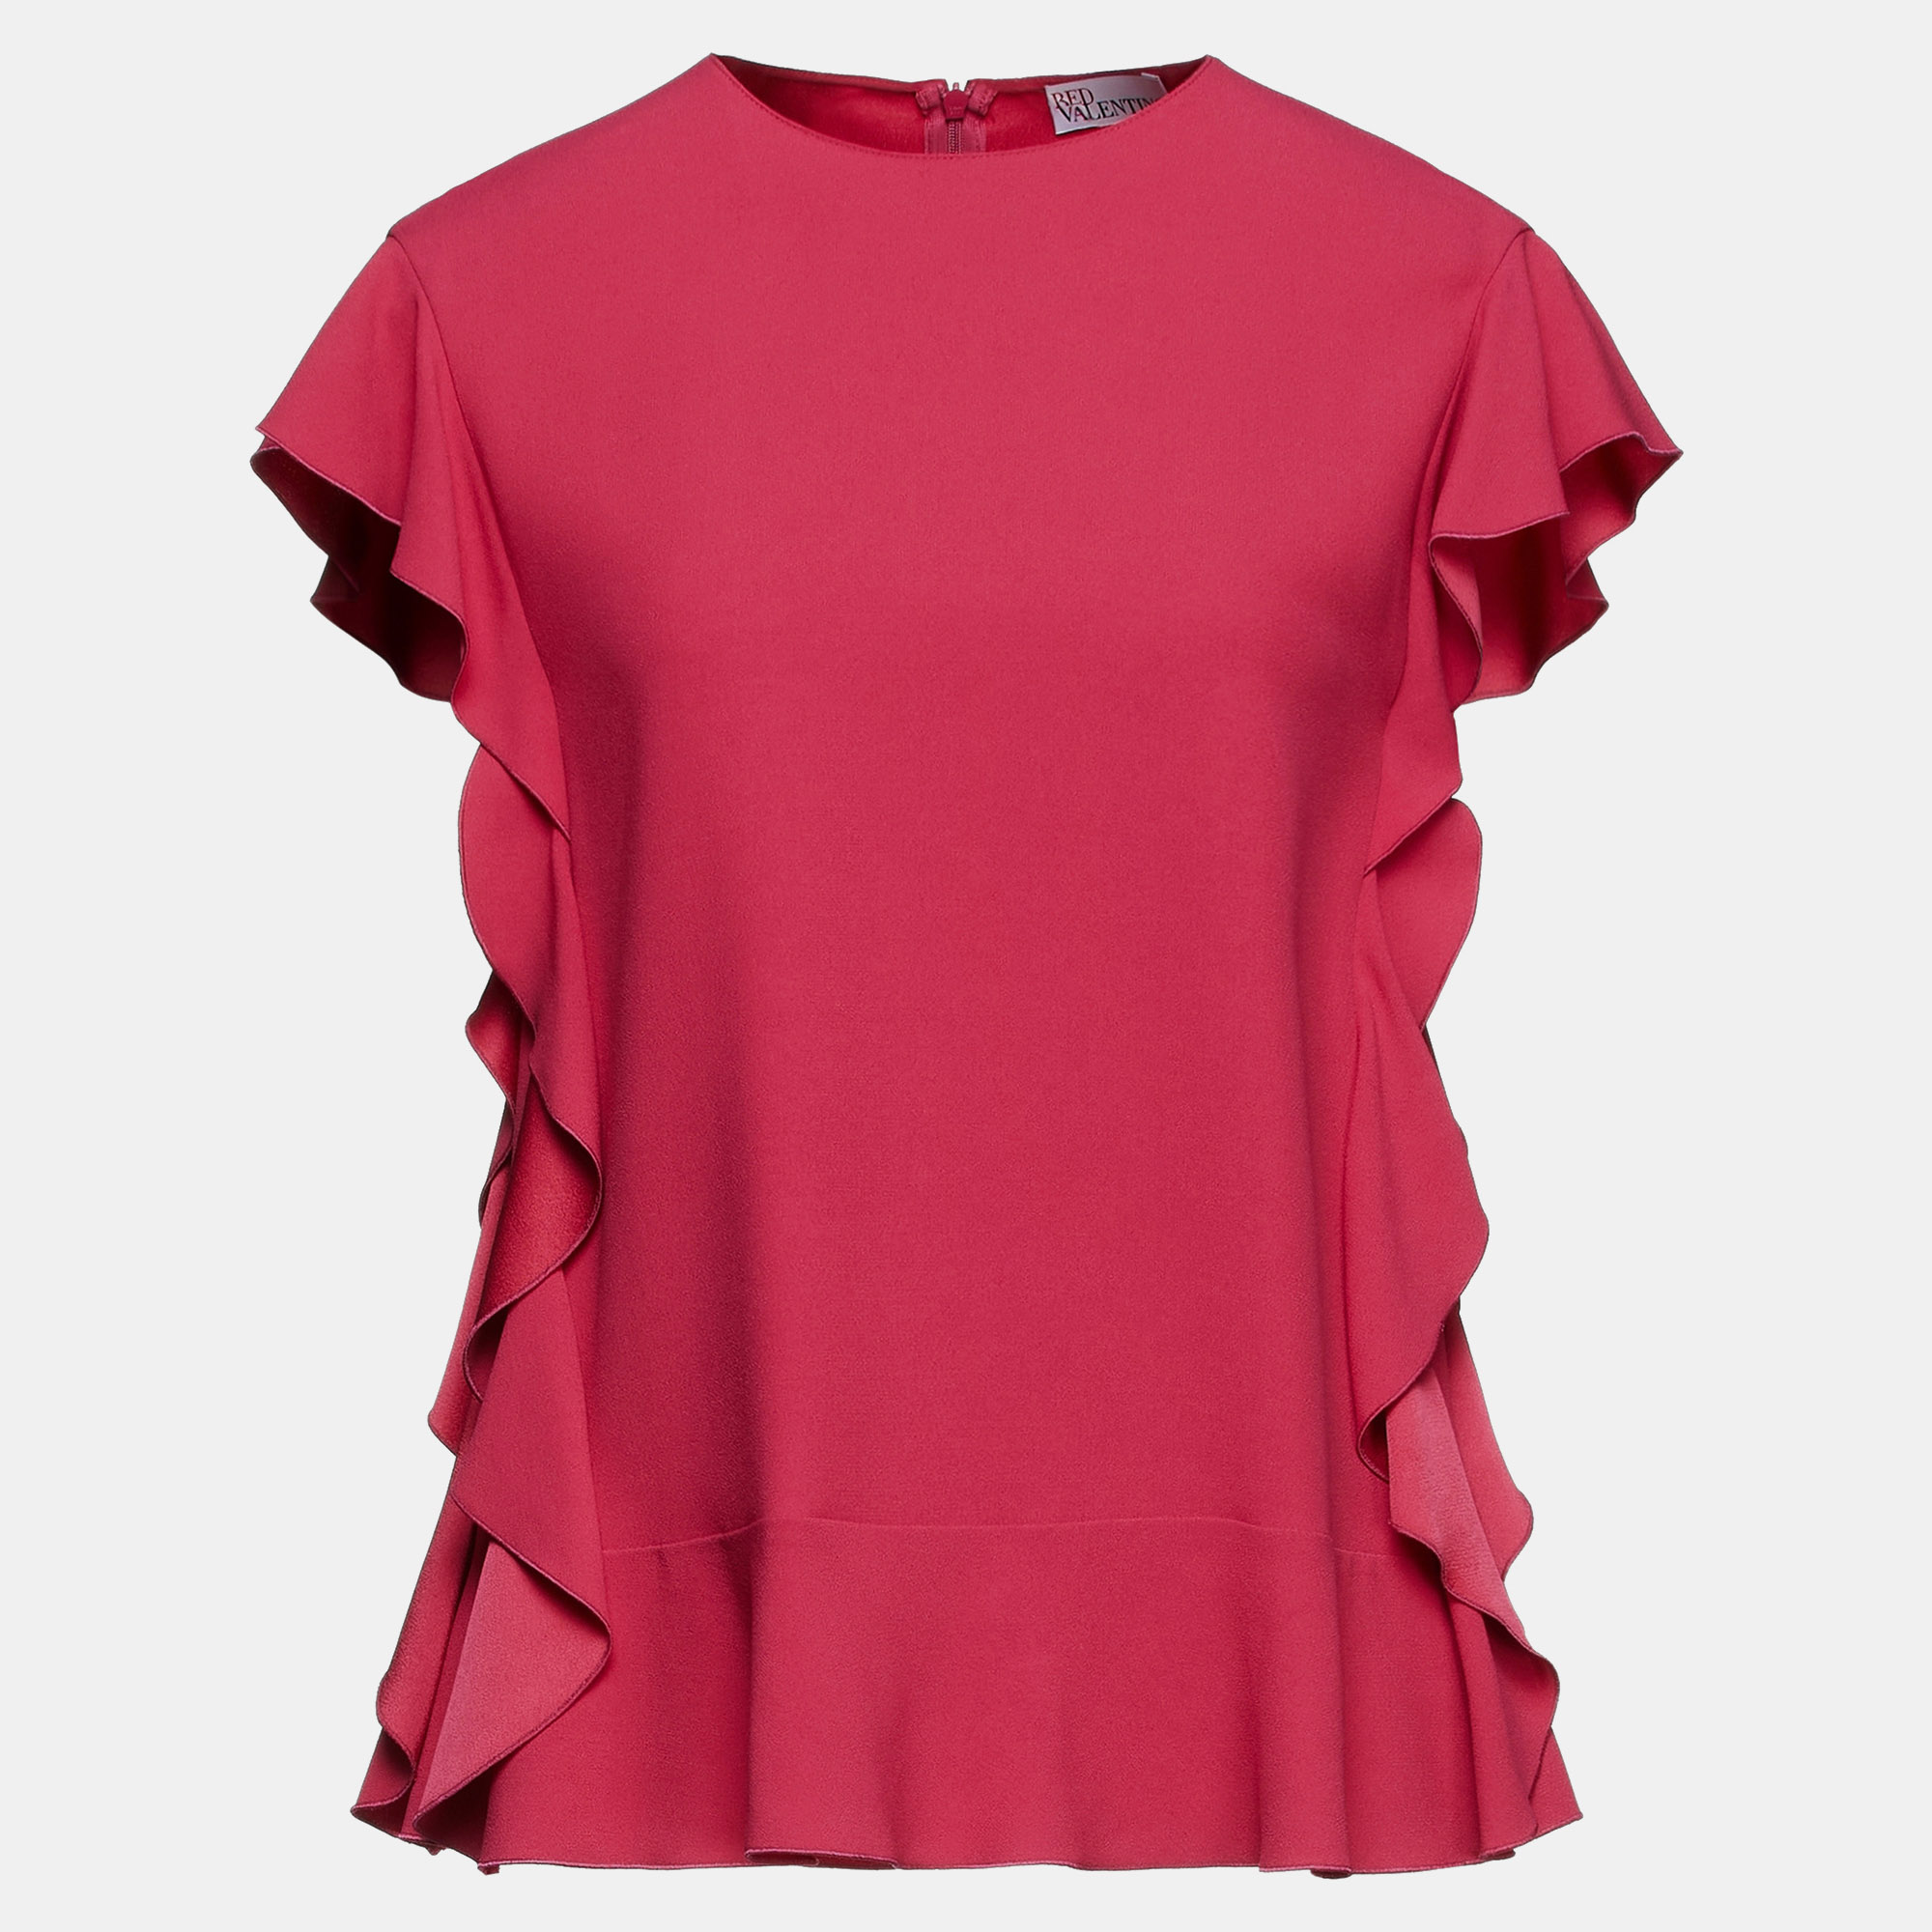 Red valentino redvalentino acetate short sleeved top 40